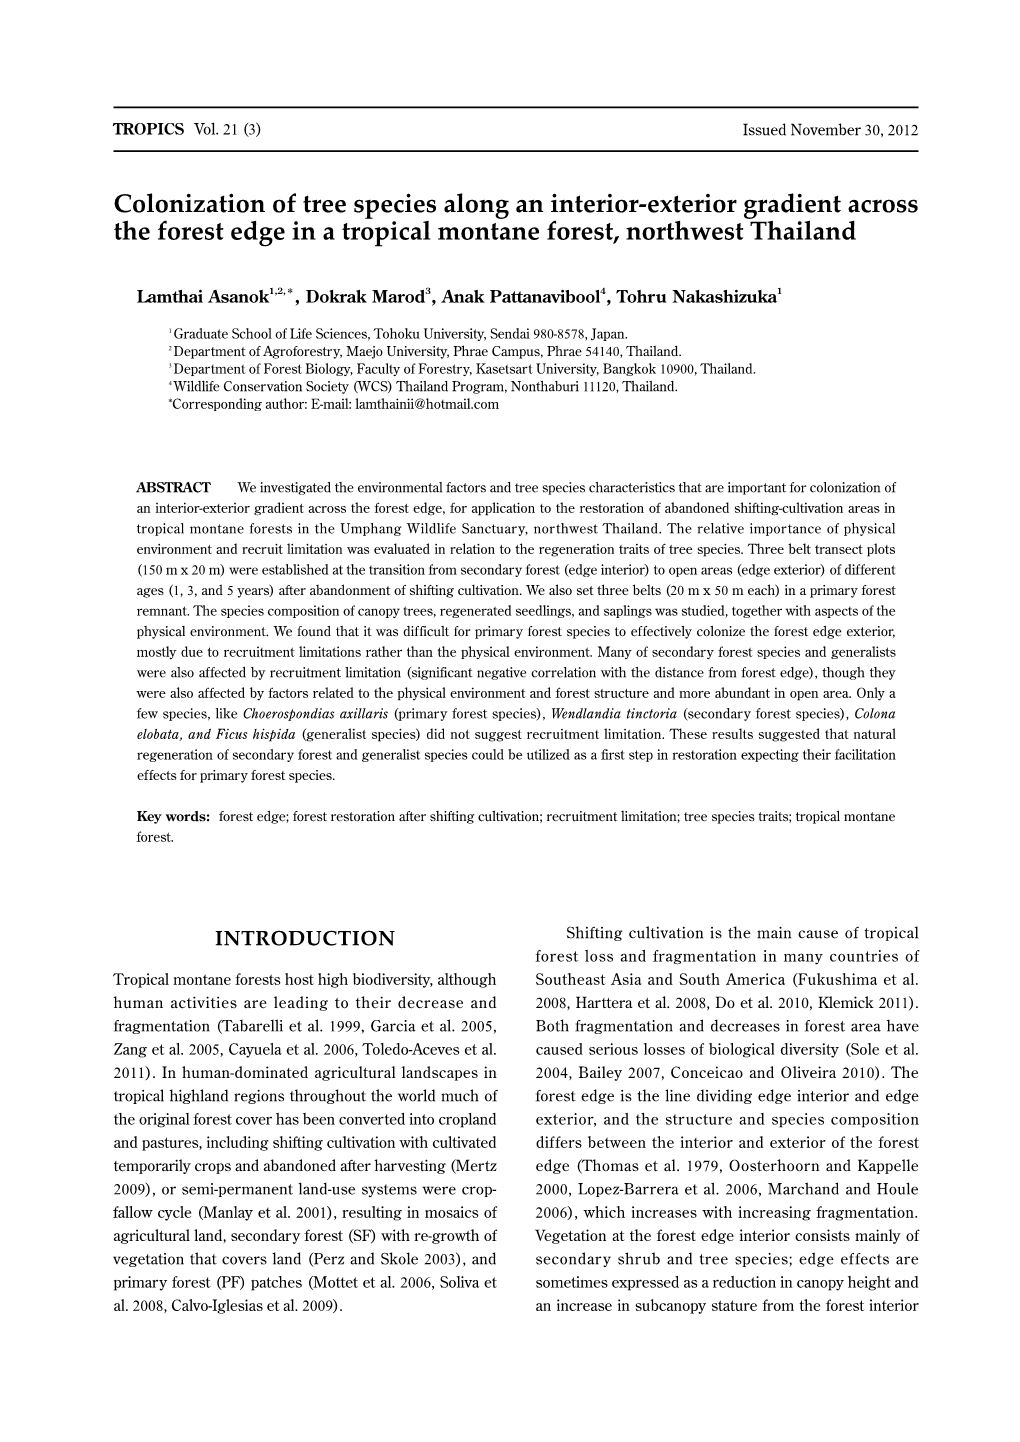 Colonization of Tree Species Along an Interior-Exterior Gradient Across the Forest Edge in a Tropical Montane Forest, Northwest Thailand